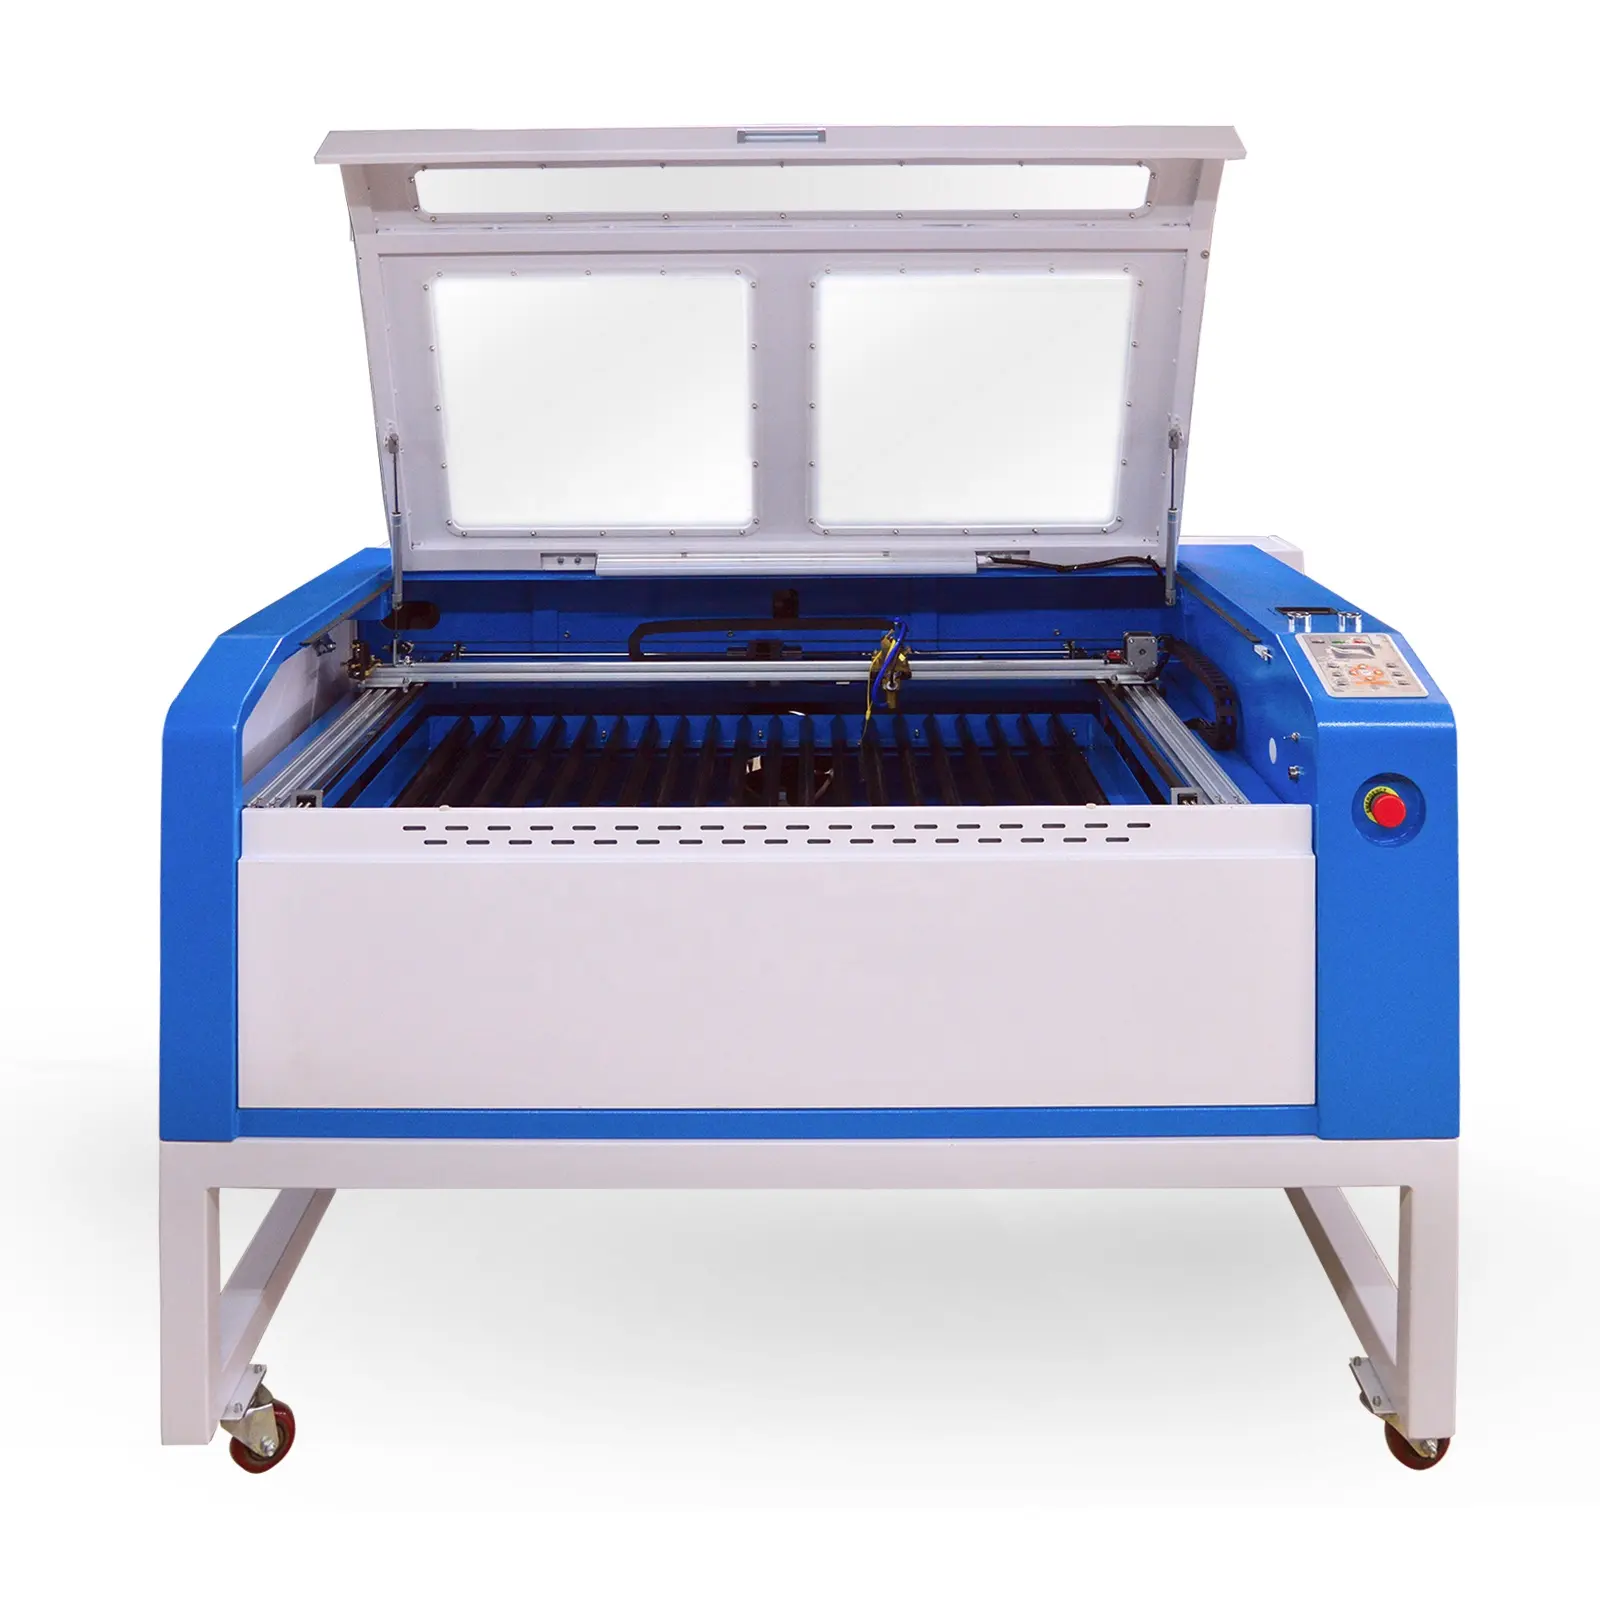 60W 80W 100W cnc laser engraving machine 900x600mm co2 laser engraver cutter with Honeycomb